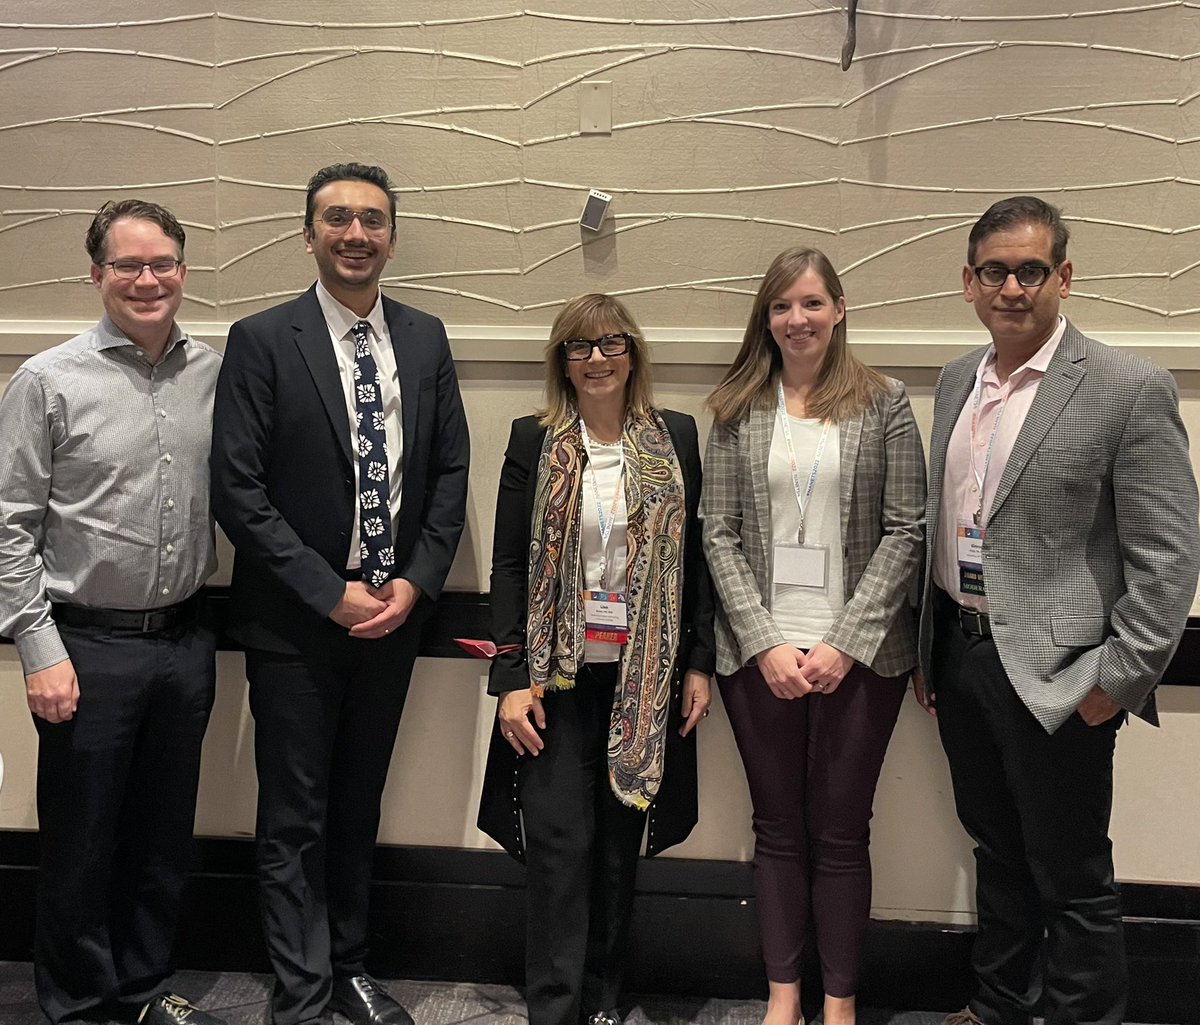 Started day 2 of #NANETS22 at 7 AM to meet my wonder colleagues from Canada and US. Ecstatic to work with eminent experts like Dr Simron Singh and Dr Lisa Bodei on our international NCTN RCT. #NETRETREAT PRRT re-treatment post progression. Stay tuned!!